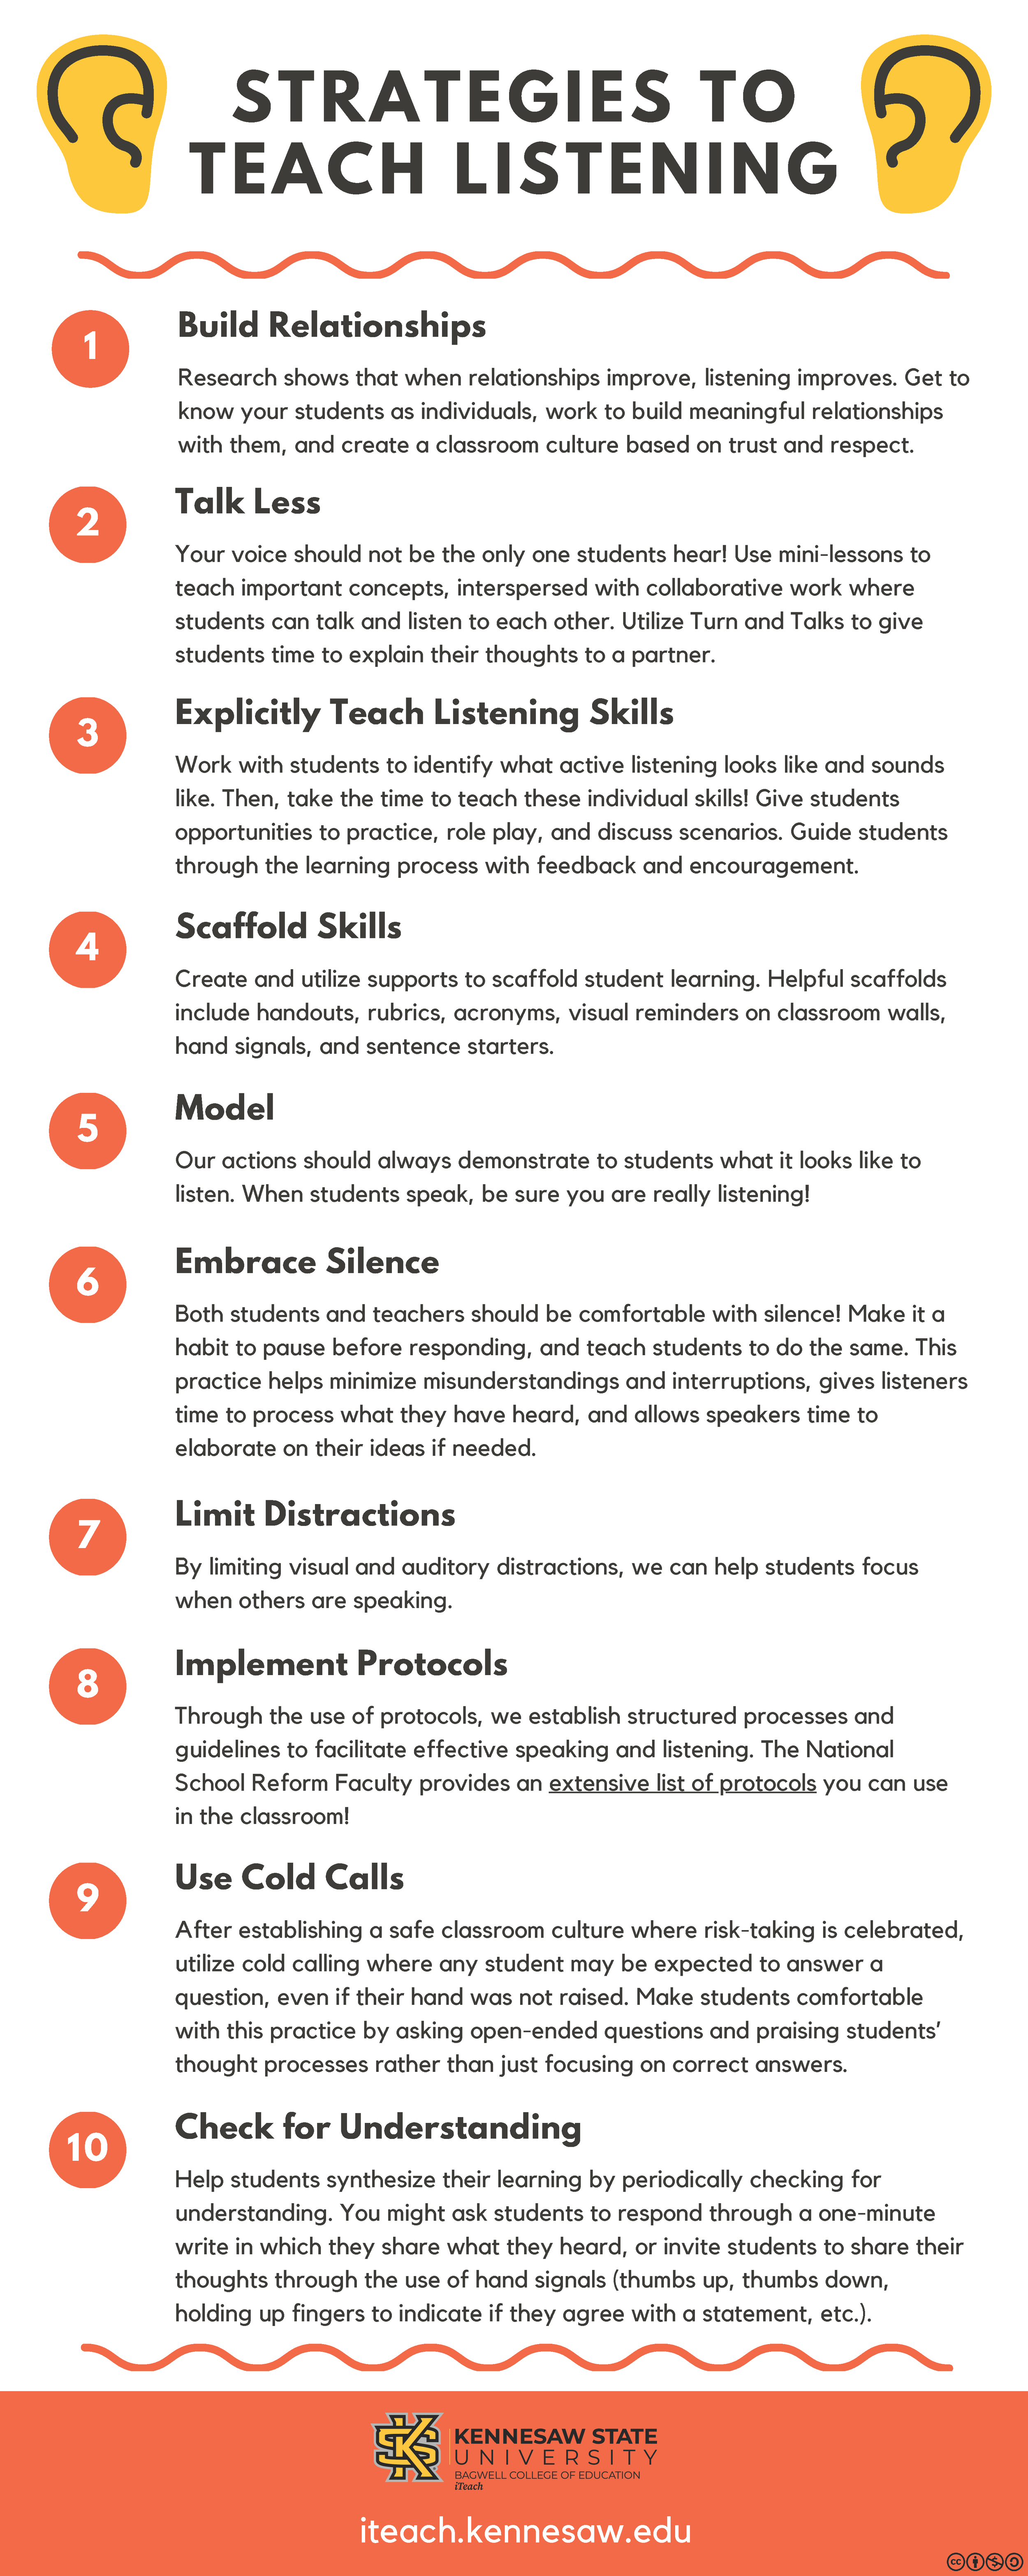 Strategies To Support Listening.png